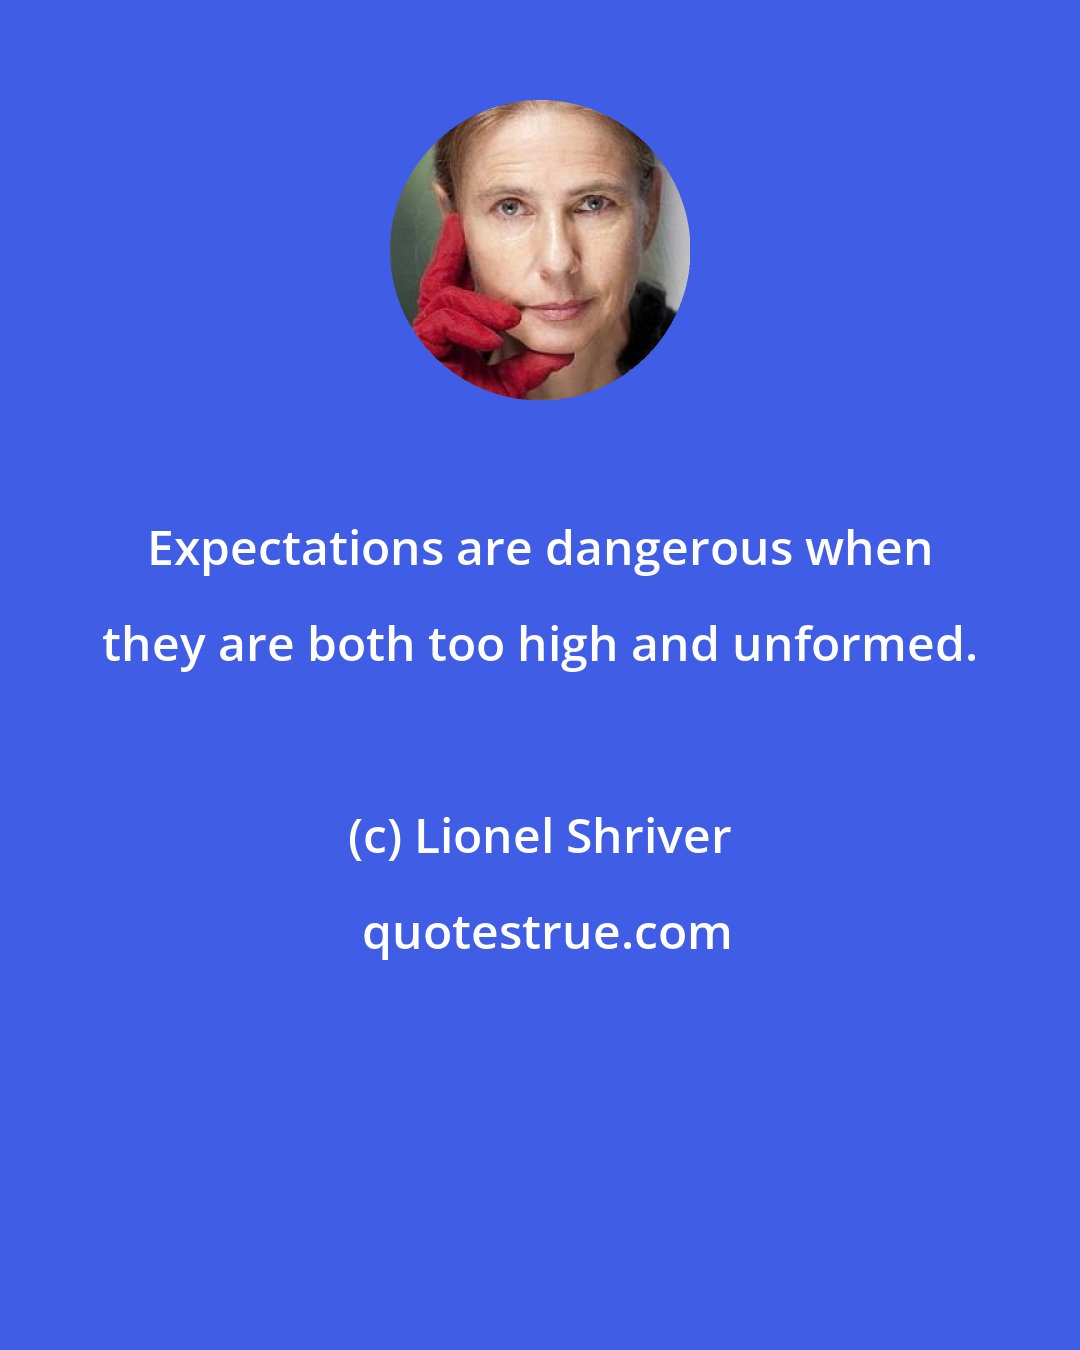 Lionel Shriver: Expectations are dangerous when they are both too high and unformed.